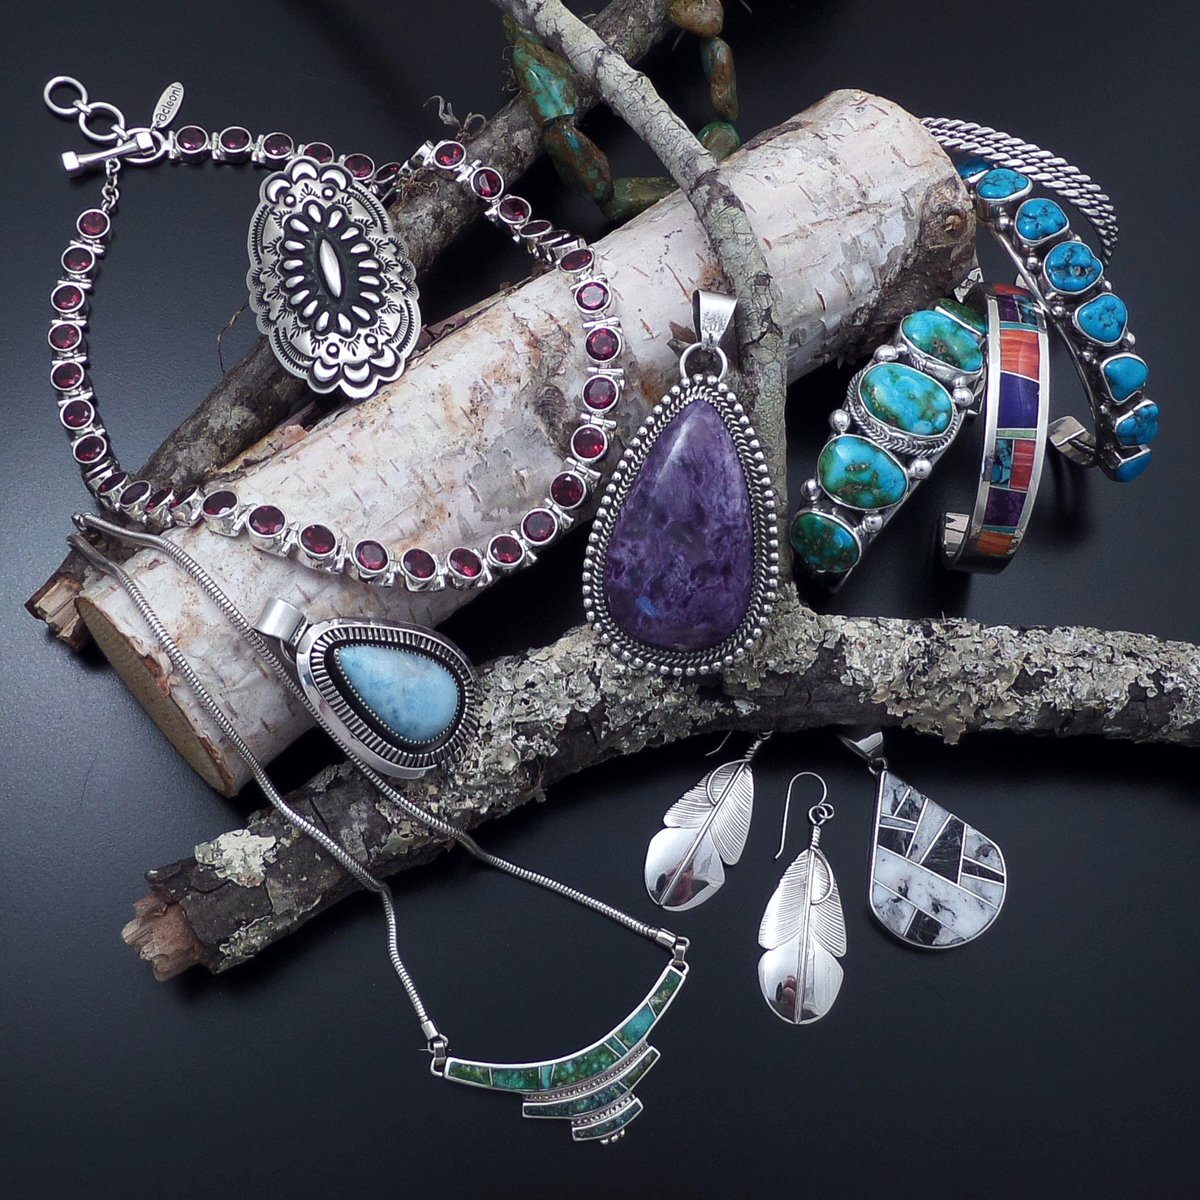 40% to 50% OFF Winter Weekend Sale! Shop now castlegap.com #sale #jewelrysale #turquoise #sterlingsilver #designerjewelry #nativeamerican #handmade #jewelry #valentinesdaygifts #jewelryboutique #dallas #smallbusiness #familybusiness